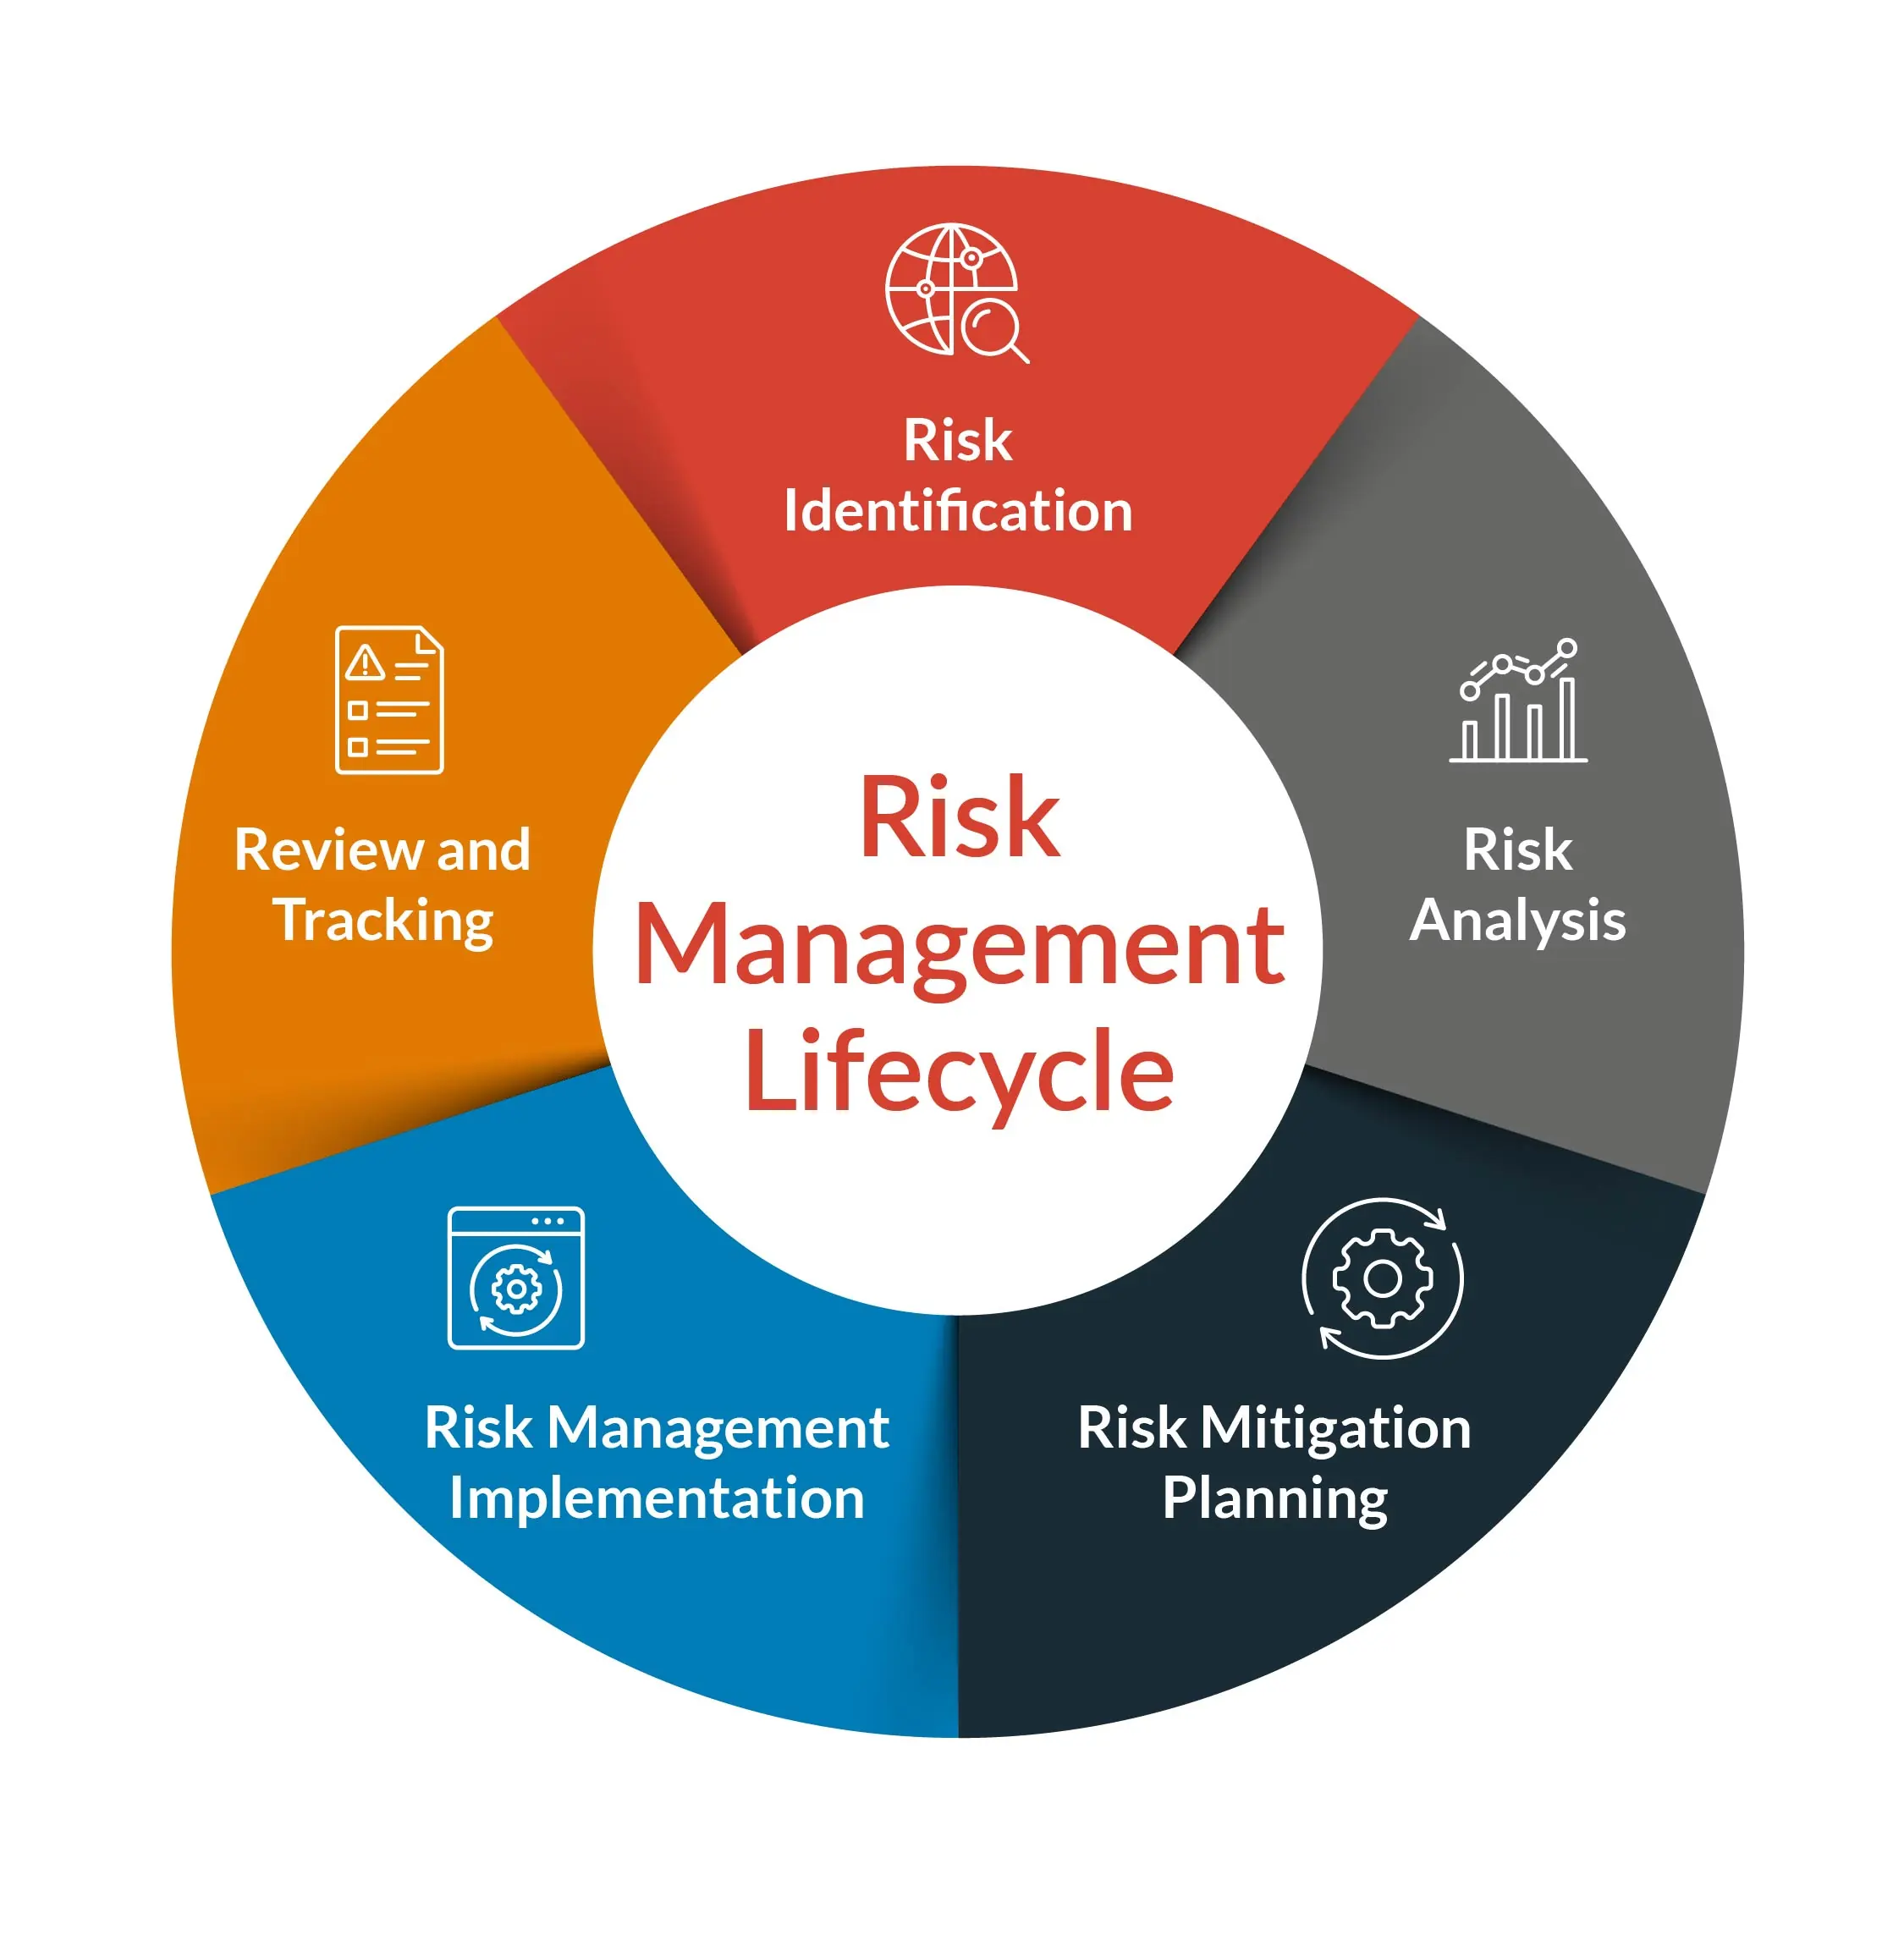 Risk management lifecycle diagram showing five steps